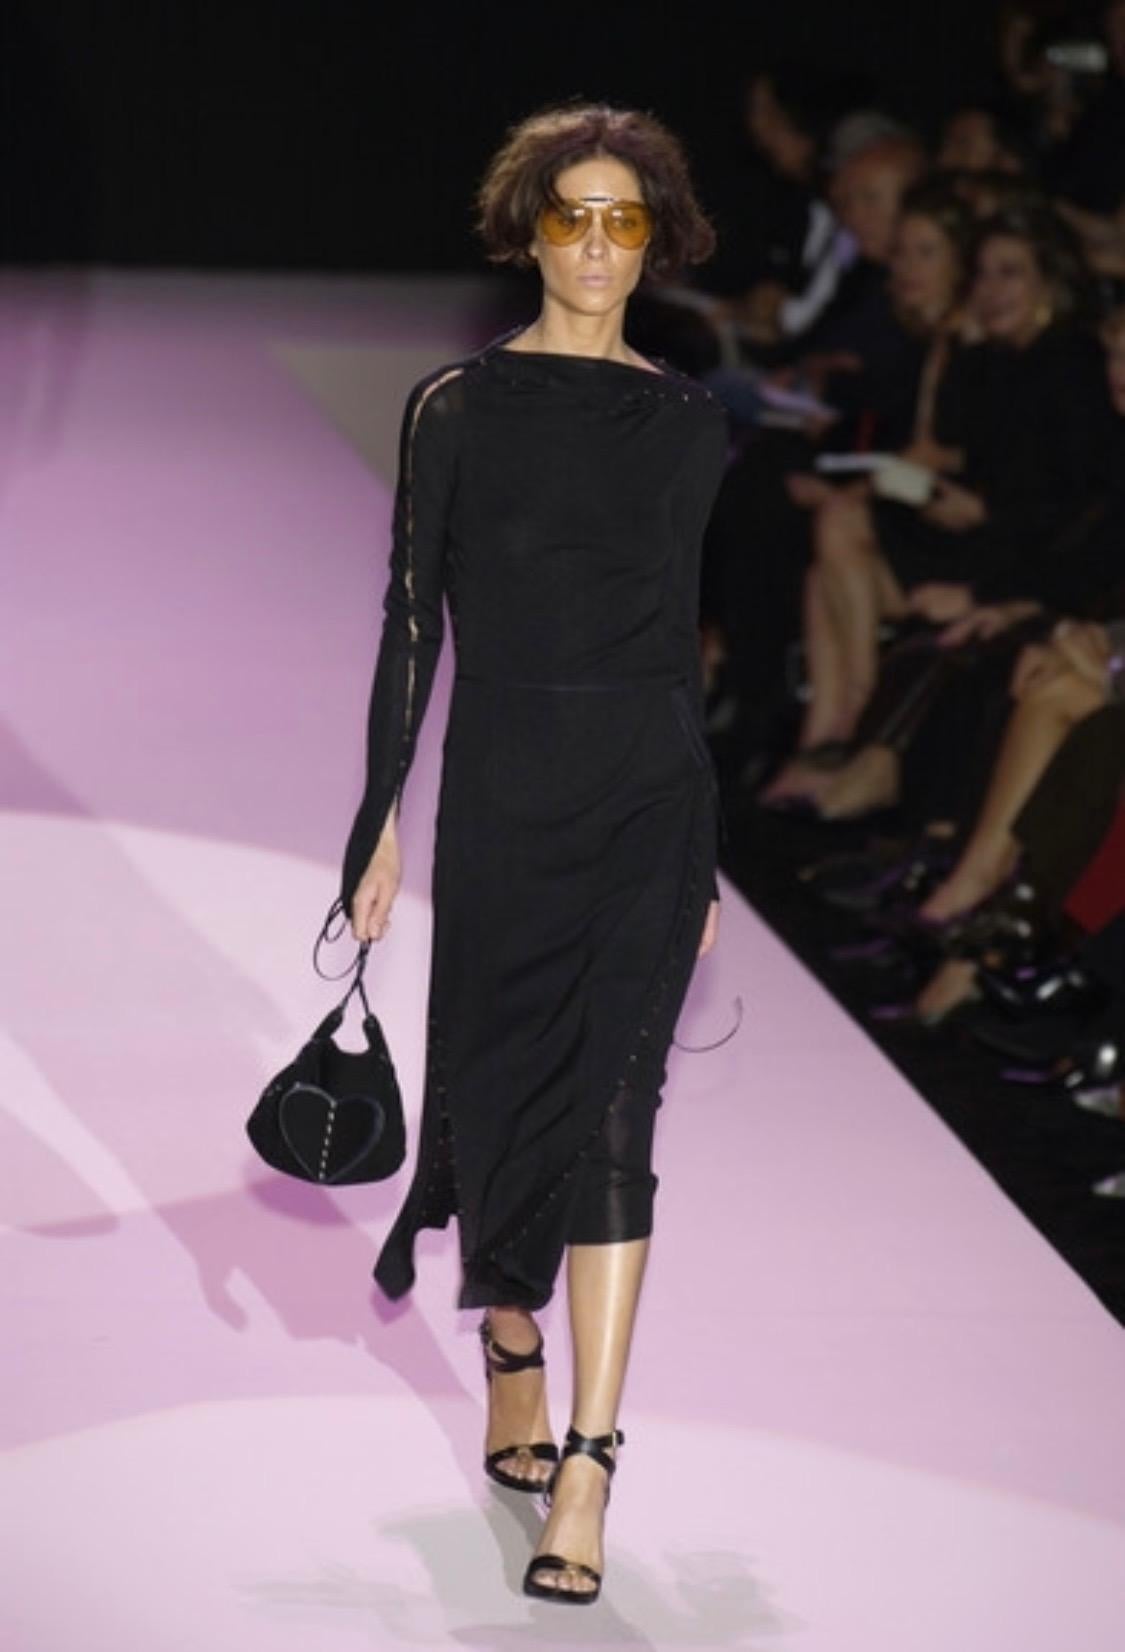 Presenting a slinky hook and eye closure accented sweater dress set designed by Tom Ford for Gucci's Spring/Summer 2002 collection. This set debuted as look number 23 on Erin Wasson on the Spring/Summer 2002 runway and was seen on Debra Messing at